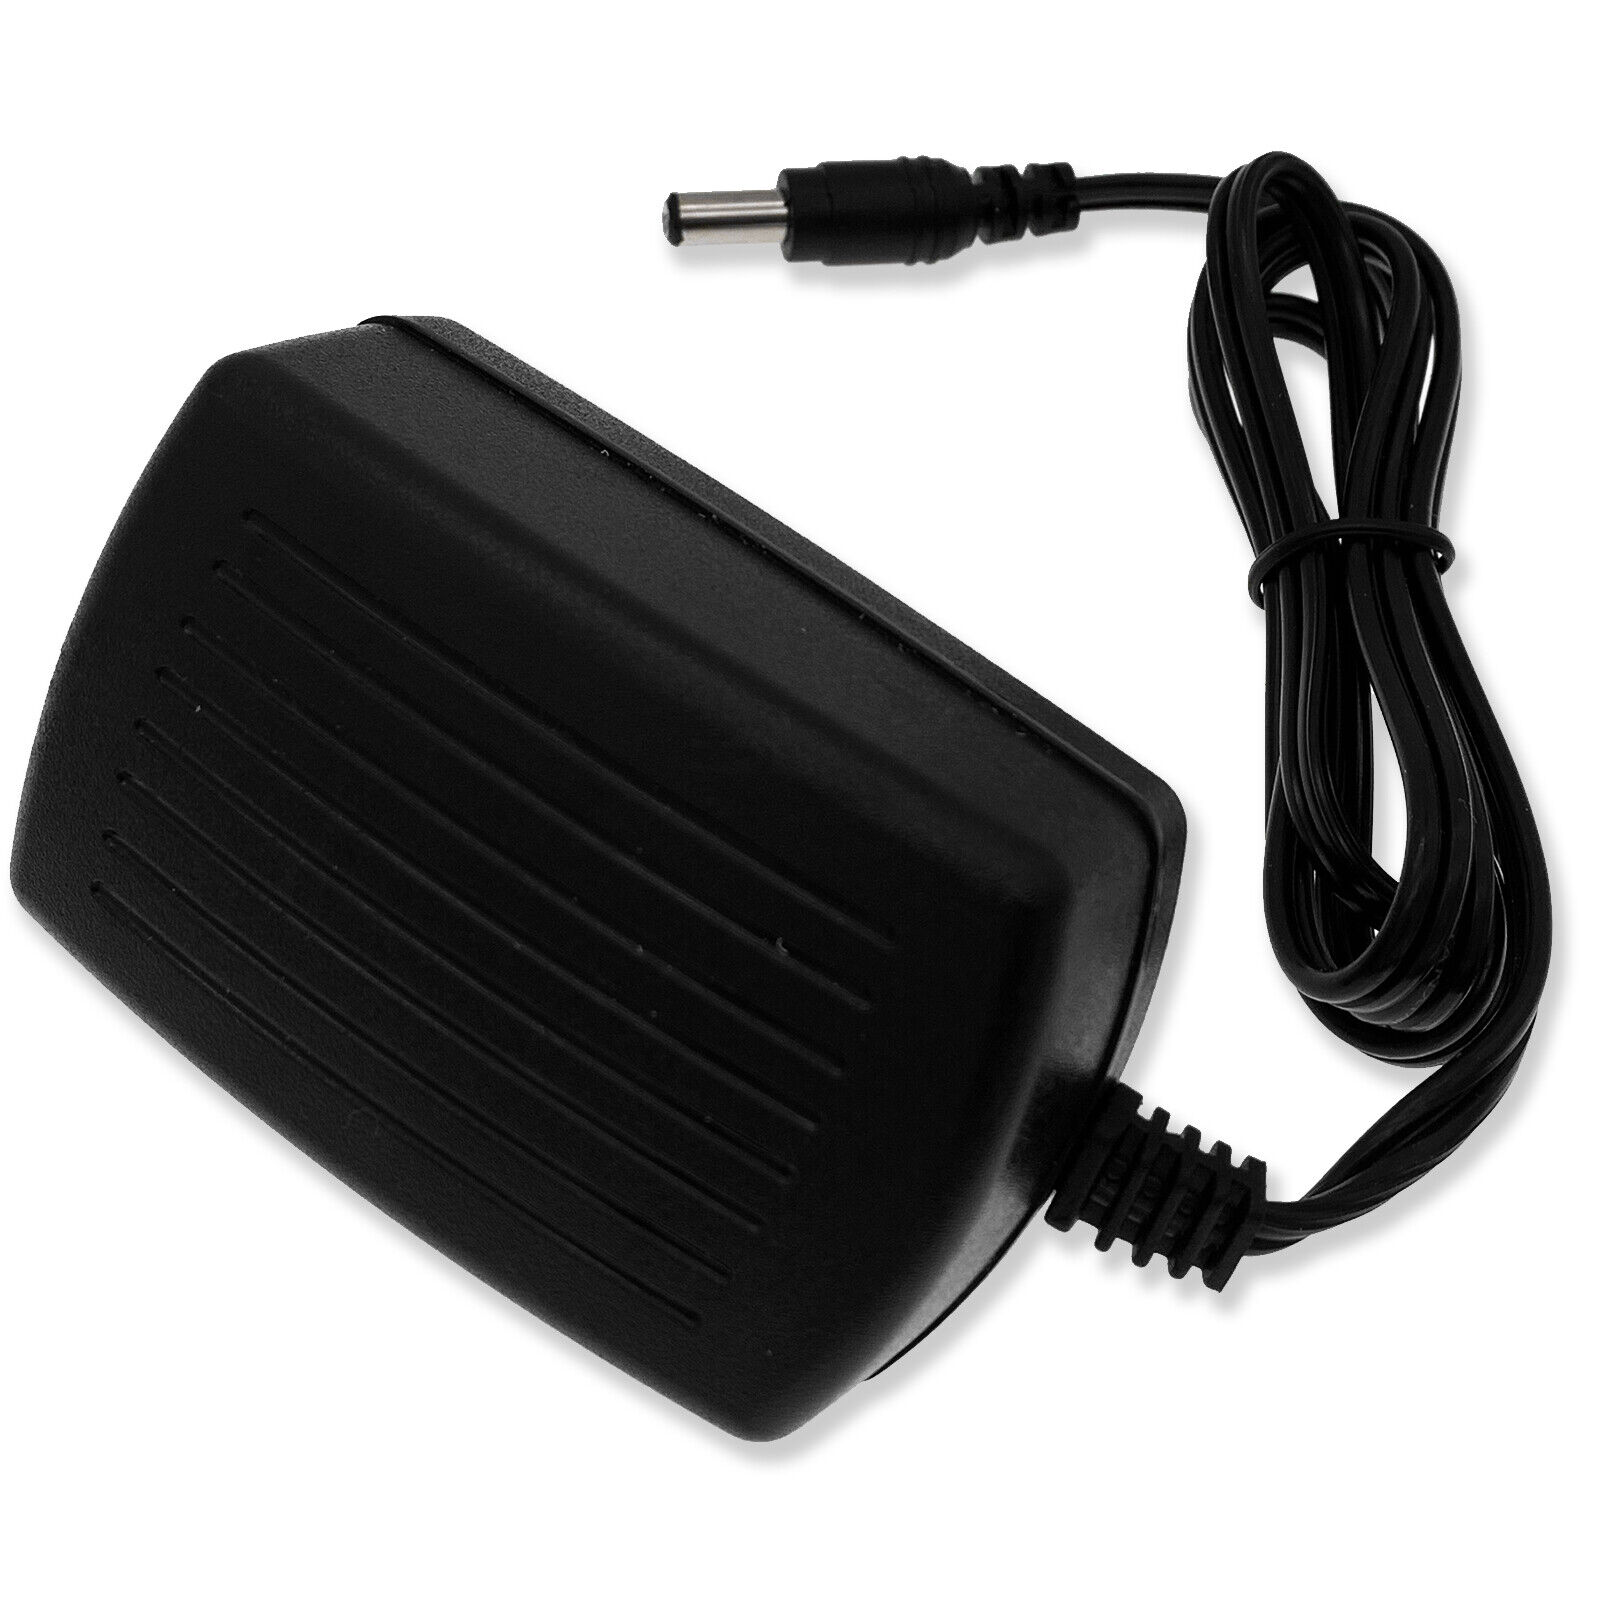 14V AC DC Adapter For Labtec CS-1400 CS1400 Speakers Power Supply Charger Cord Compatible Brand For Motorola Type AC/DC